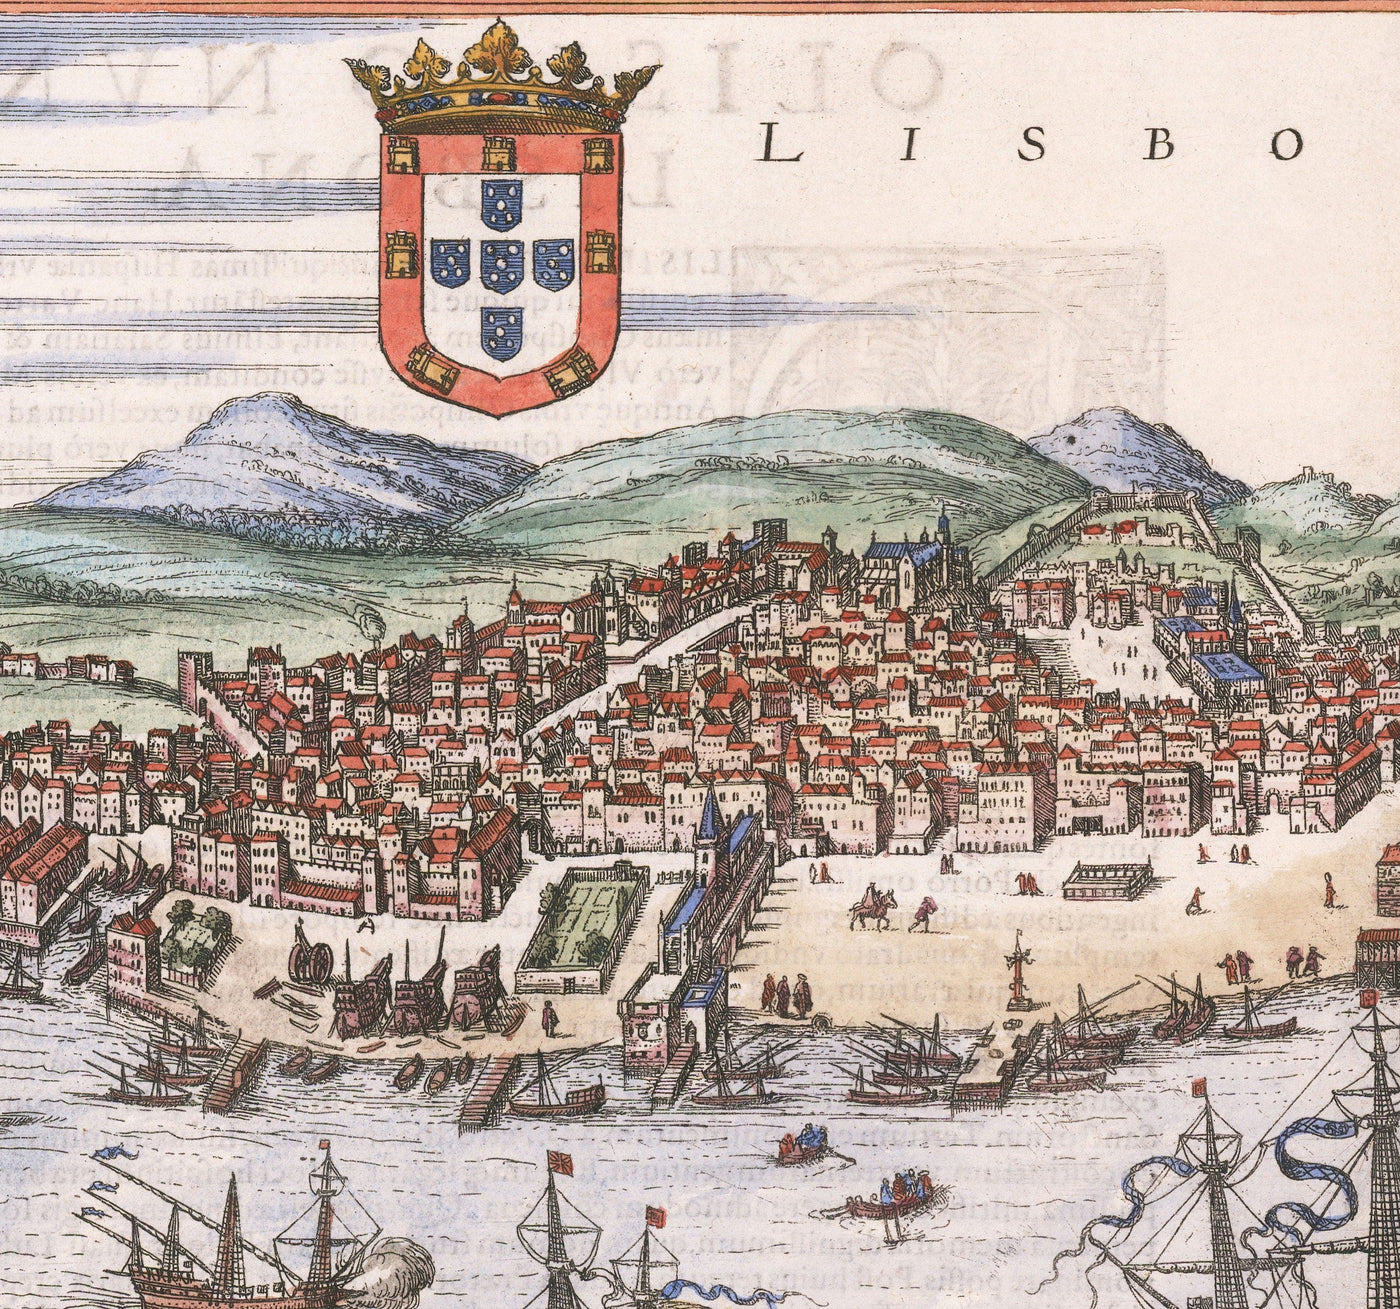 Old Map of Lisbon, Portugal by Georg Braun in 1572 - Castle, Cathedral, City Walls, Downtown, Old Streets